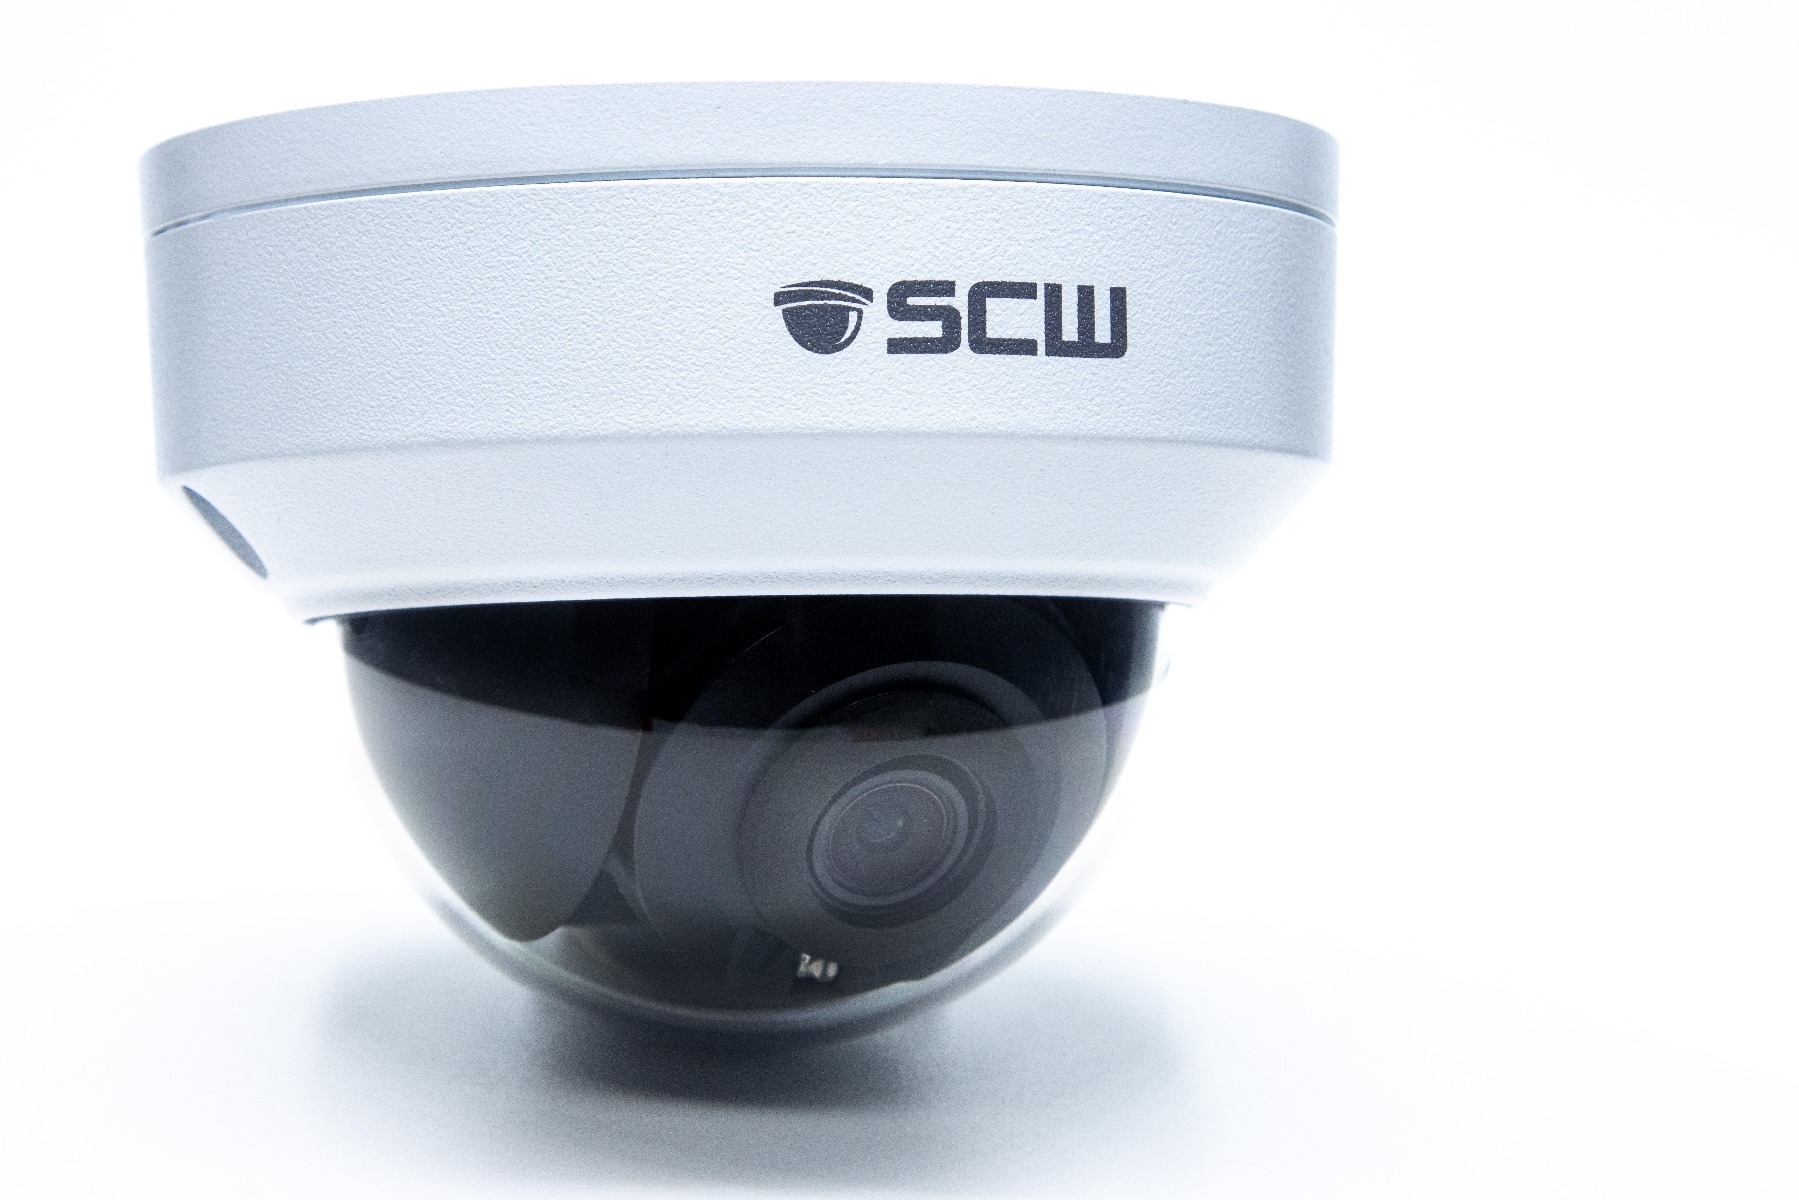 DISCONTINUED - The Sheriff 8.0 - 26DF8M-IK10 - 4K (8MP = 4x1080P) Vandal Proof Fixed Wide Angle Lens IK10 Dome Camera